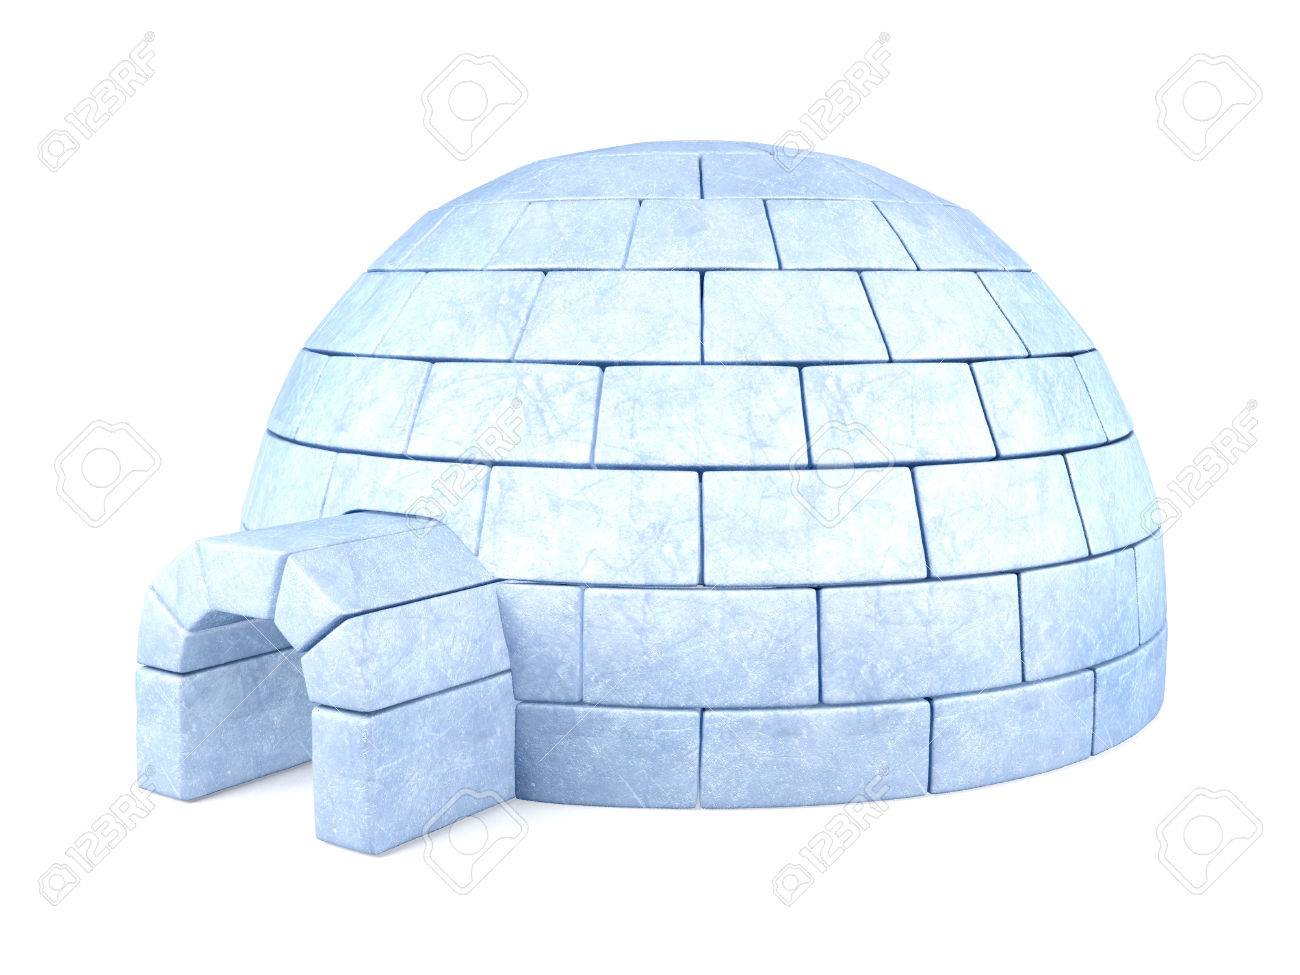 Iced Igloo Isolated On White Background Stock Photo Picture And